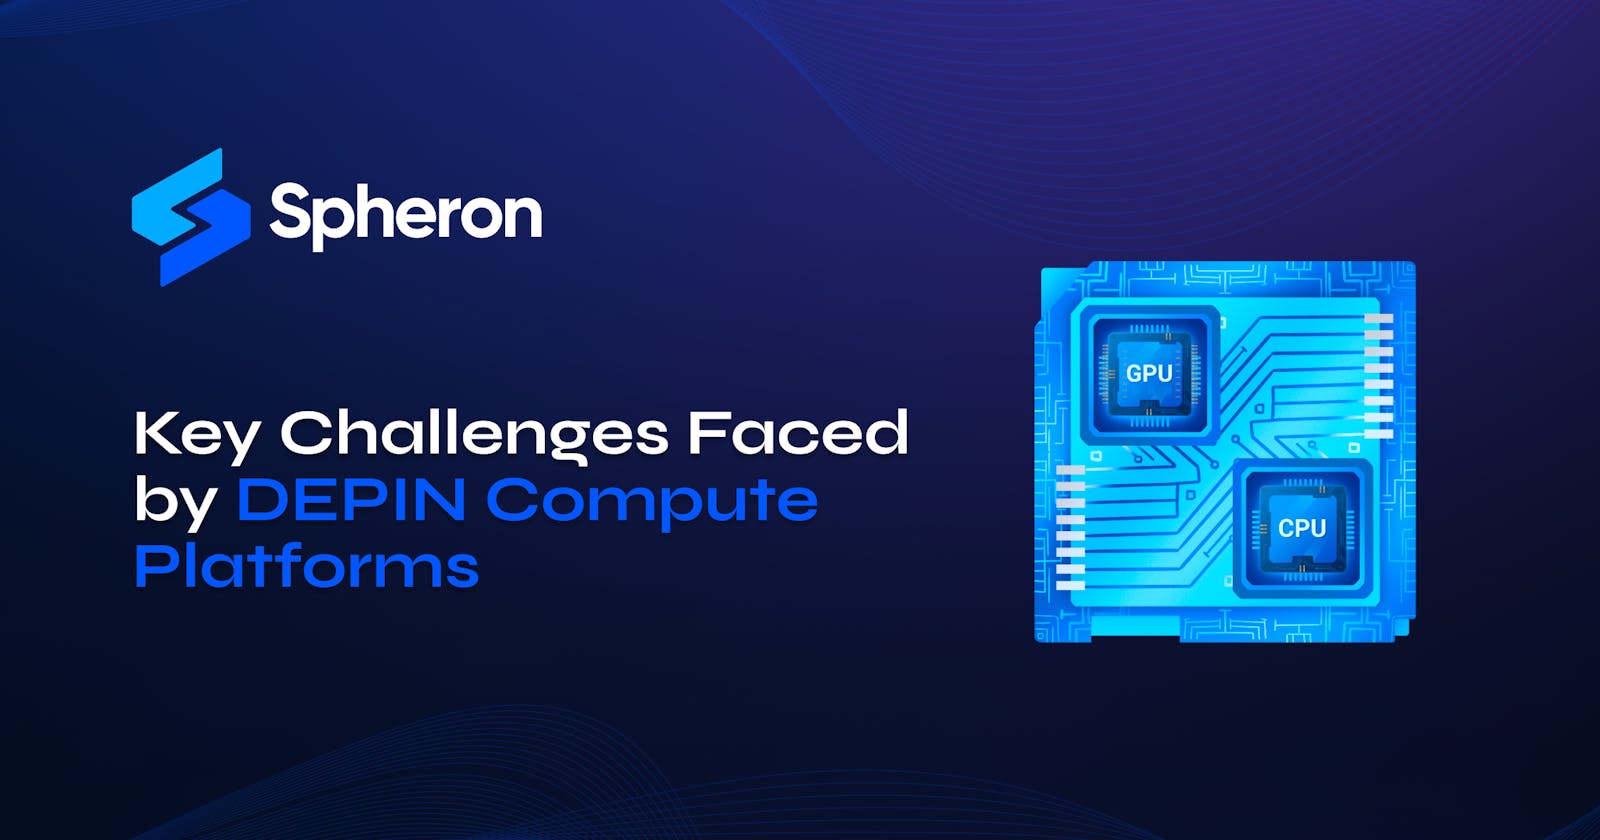 Key Challenges Faced by DEPIN Compute Platforms